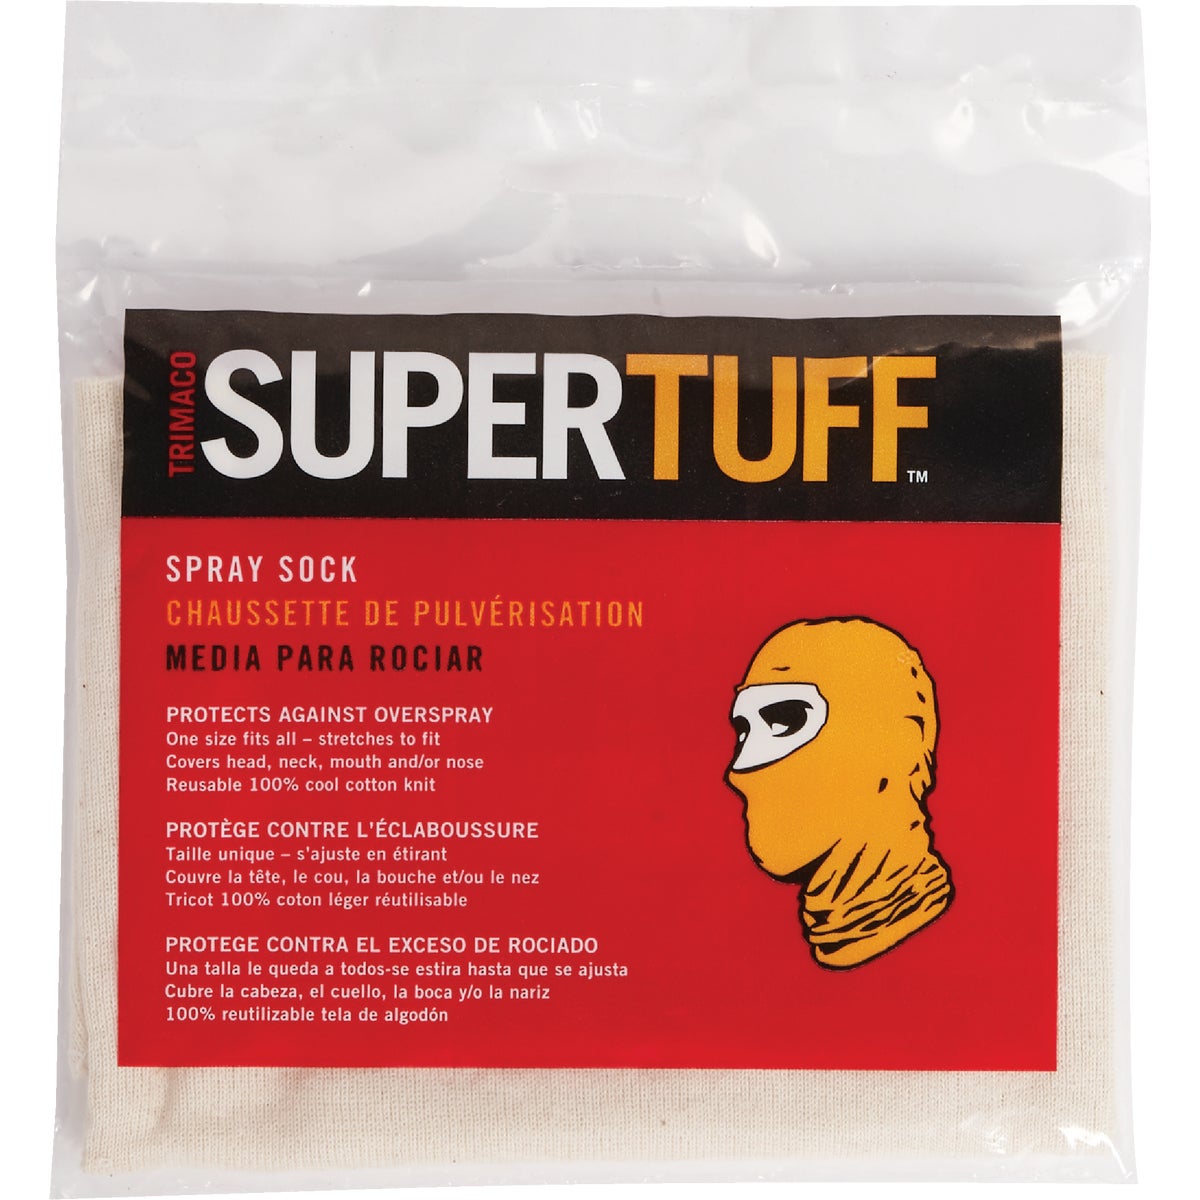 Item 783774, Protect yourself with Trimaco's SuperTuff Spray Sock.